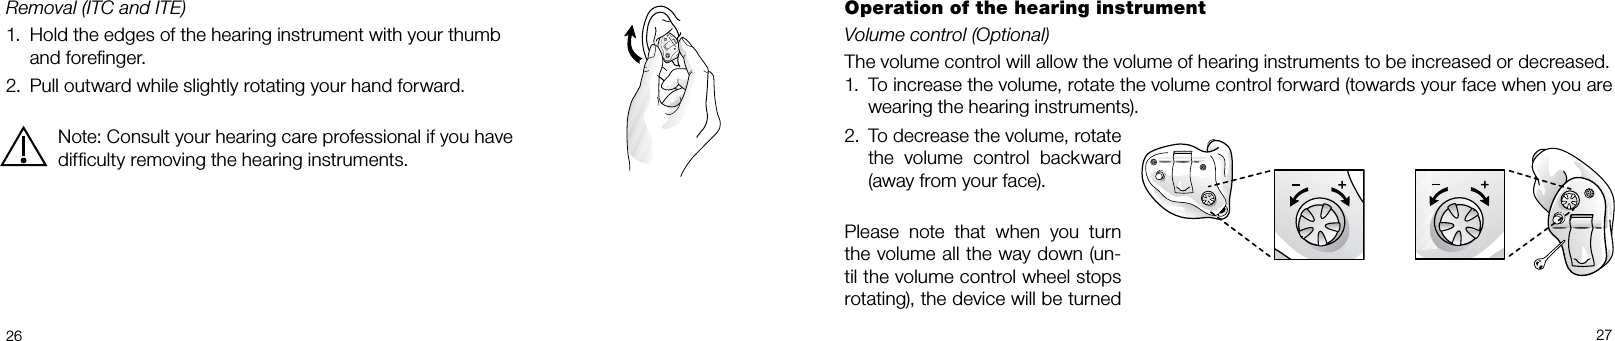  26 27Removal (ITC and ITE)1.  Hold the edges of the hearing instrument with your thumb    and foreﬁnger.2.  Pull outward while slightly rotating your hand forward.Note: Consult your hearing care professional if you have difﬁculty removing the hearing instruments.Operation of the hearing instrumentVolume control (Optional)The volume control will allow the volume of hearing instruments to be increased or decreased. 1.  To increase the volume, rotate the volume control forward (towards your face when you are wearing the hearing instruments).2.  To decrease the volume, rotate the volume control backward (away from your face).Please note that when you turn the volume all the way down (un-til the volume control wheel stops rotating), the device will be turned 